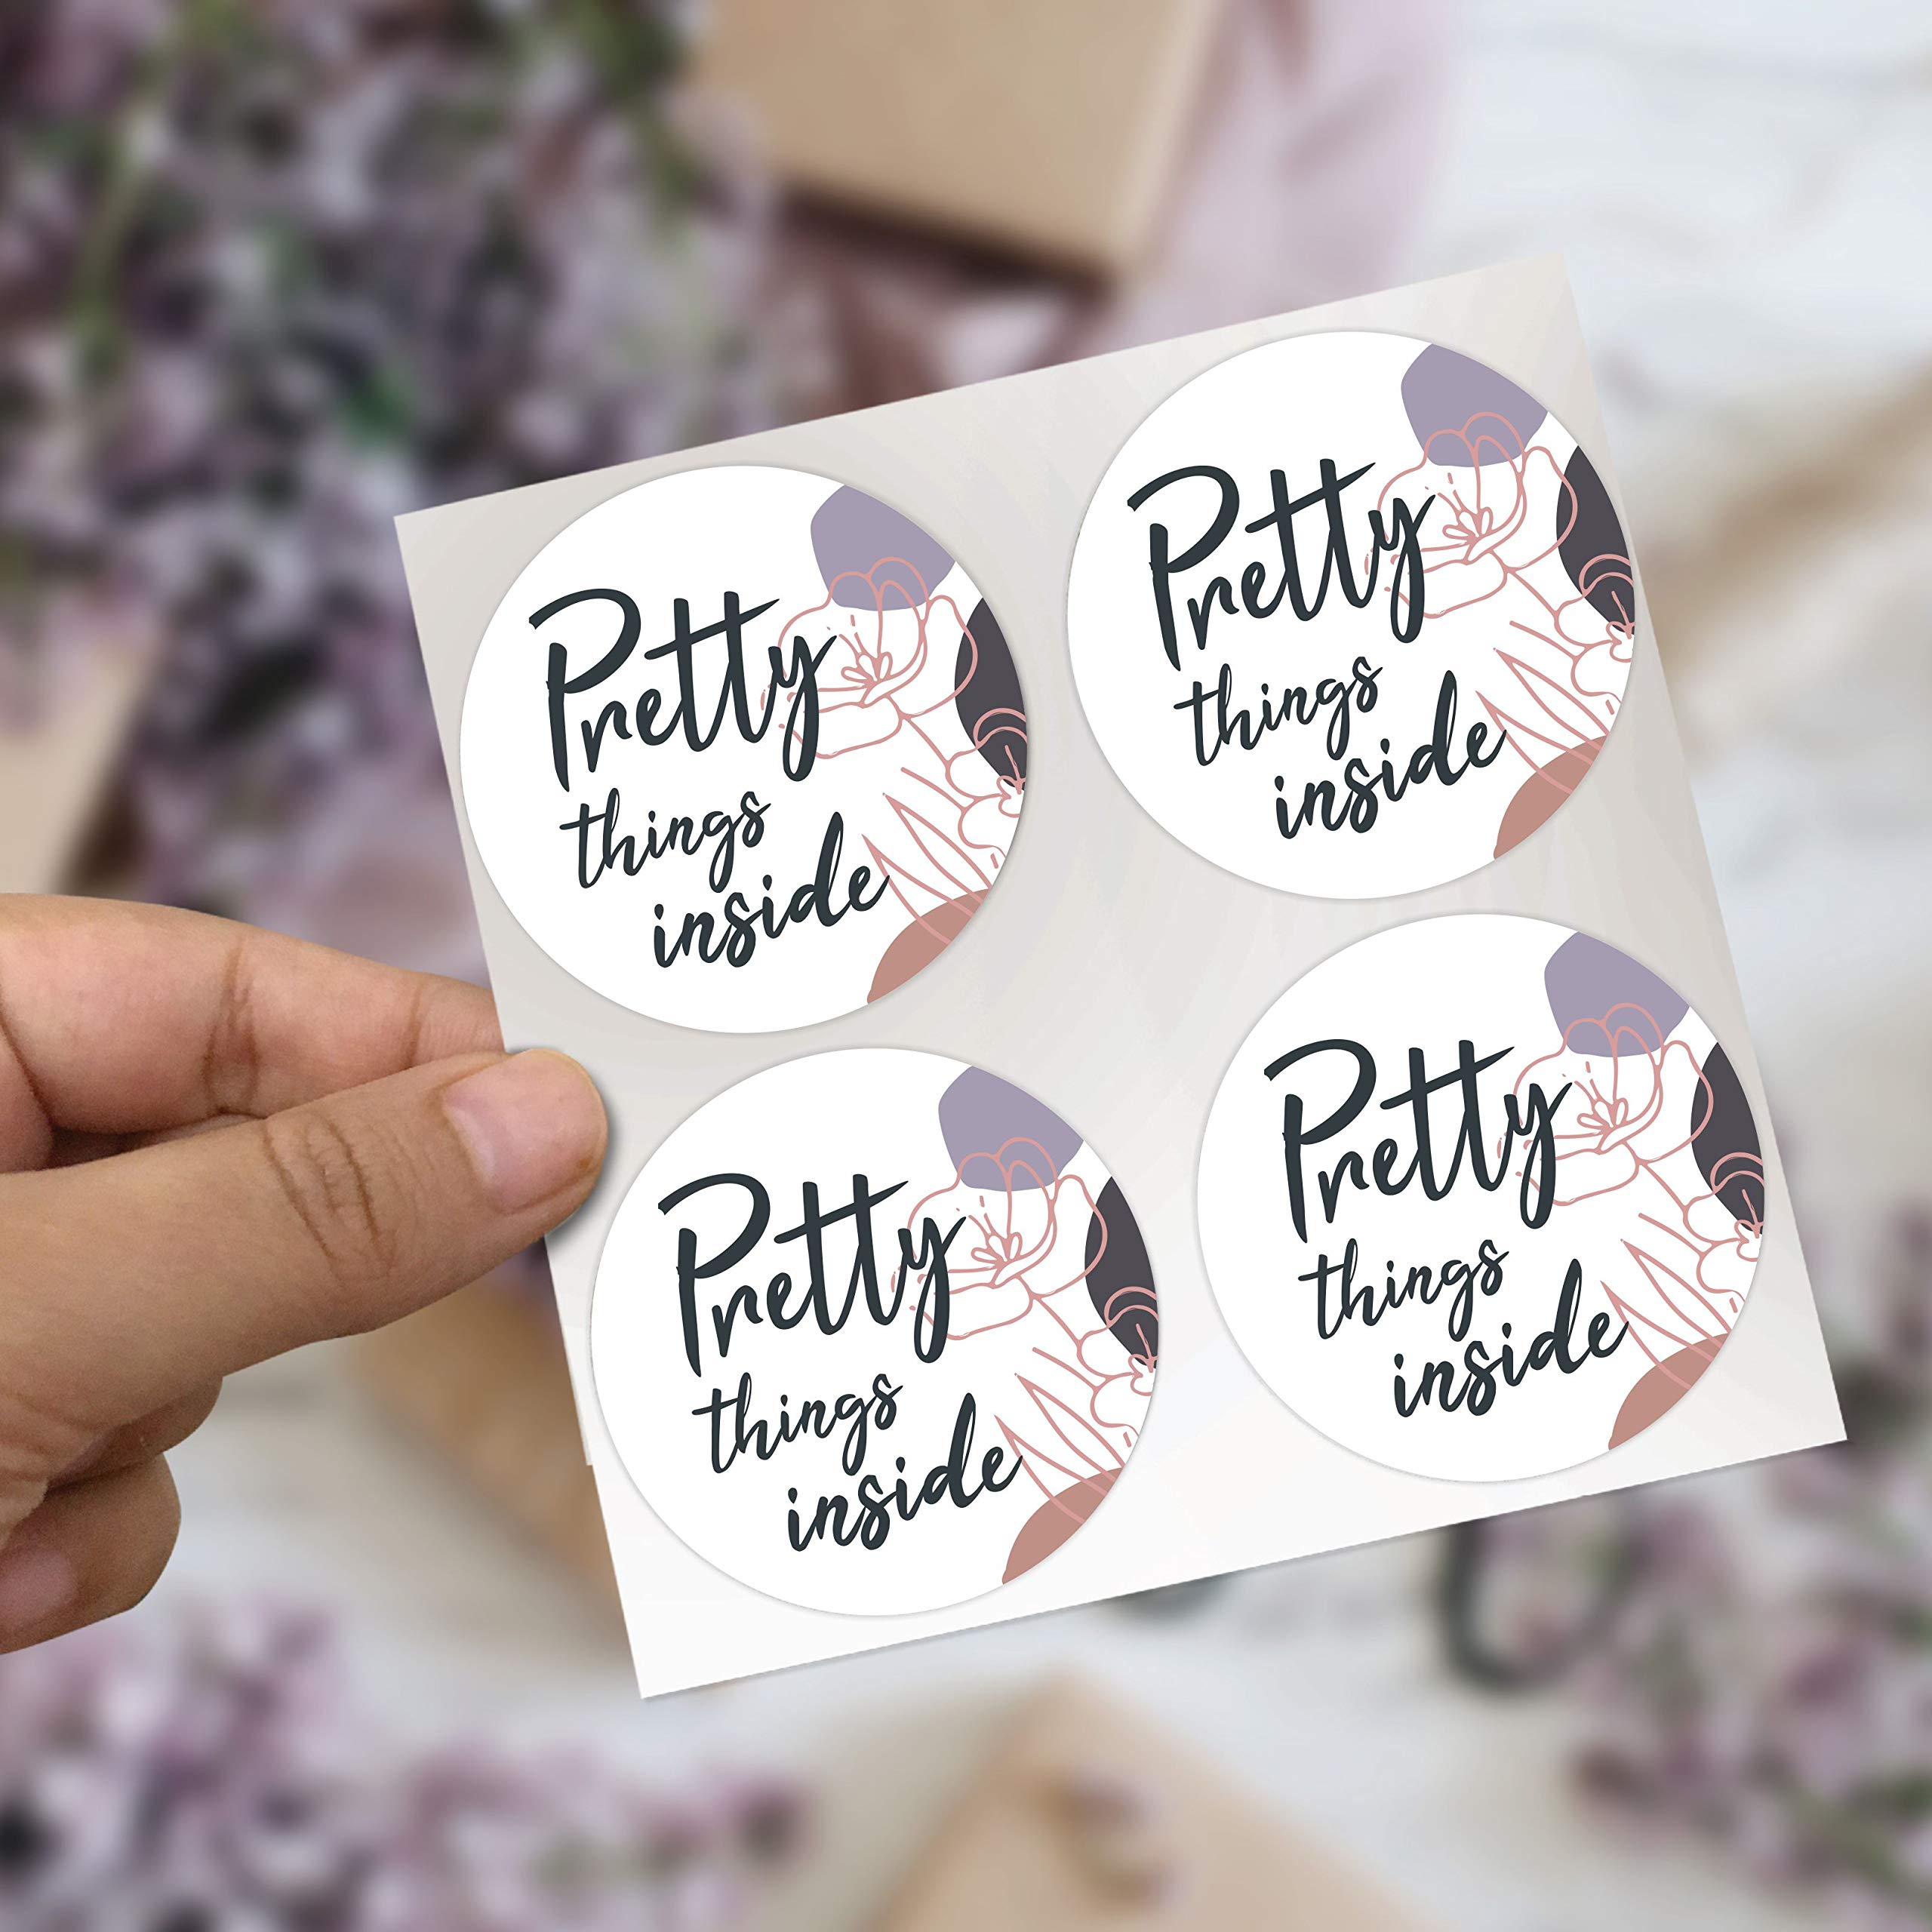 Pretty Things Inside Sticker Labels, 2 Inch Round